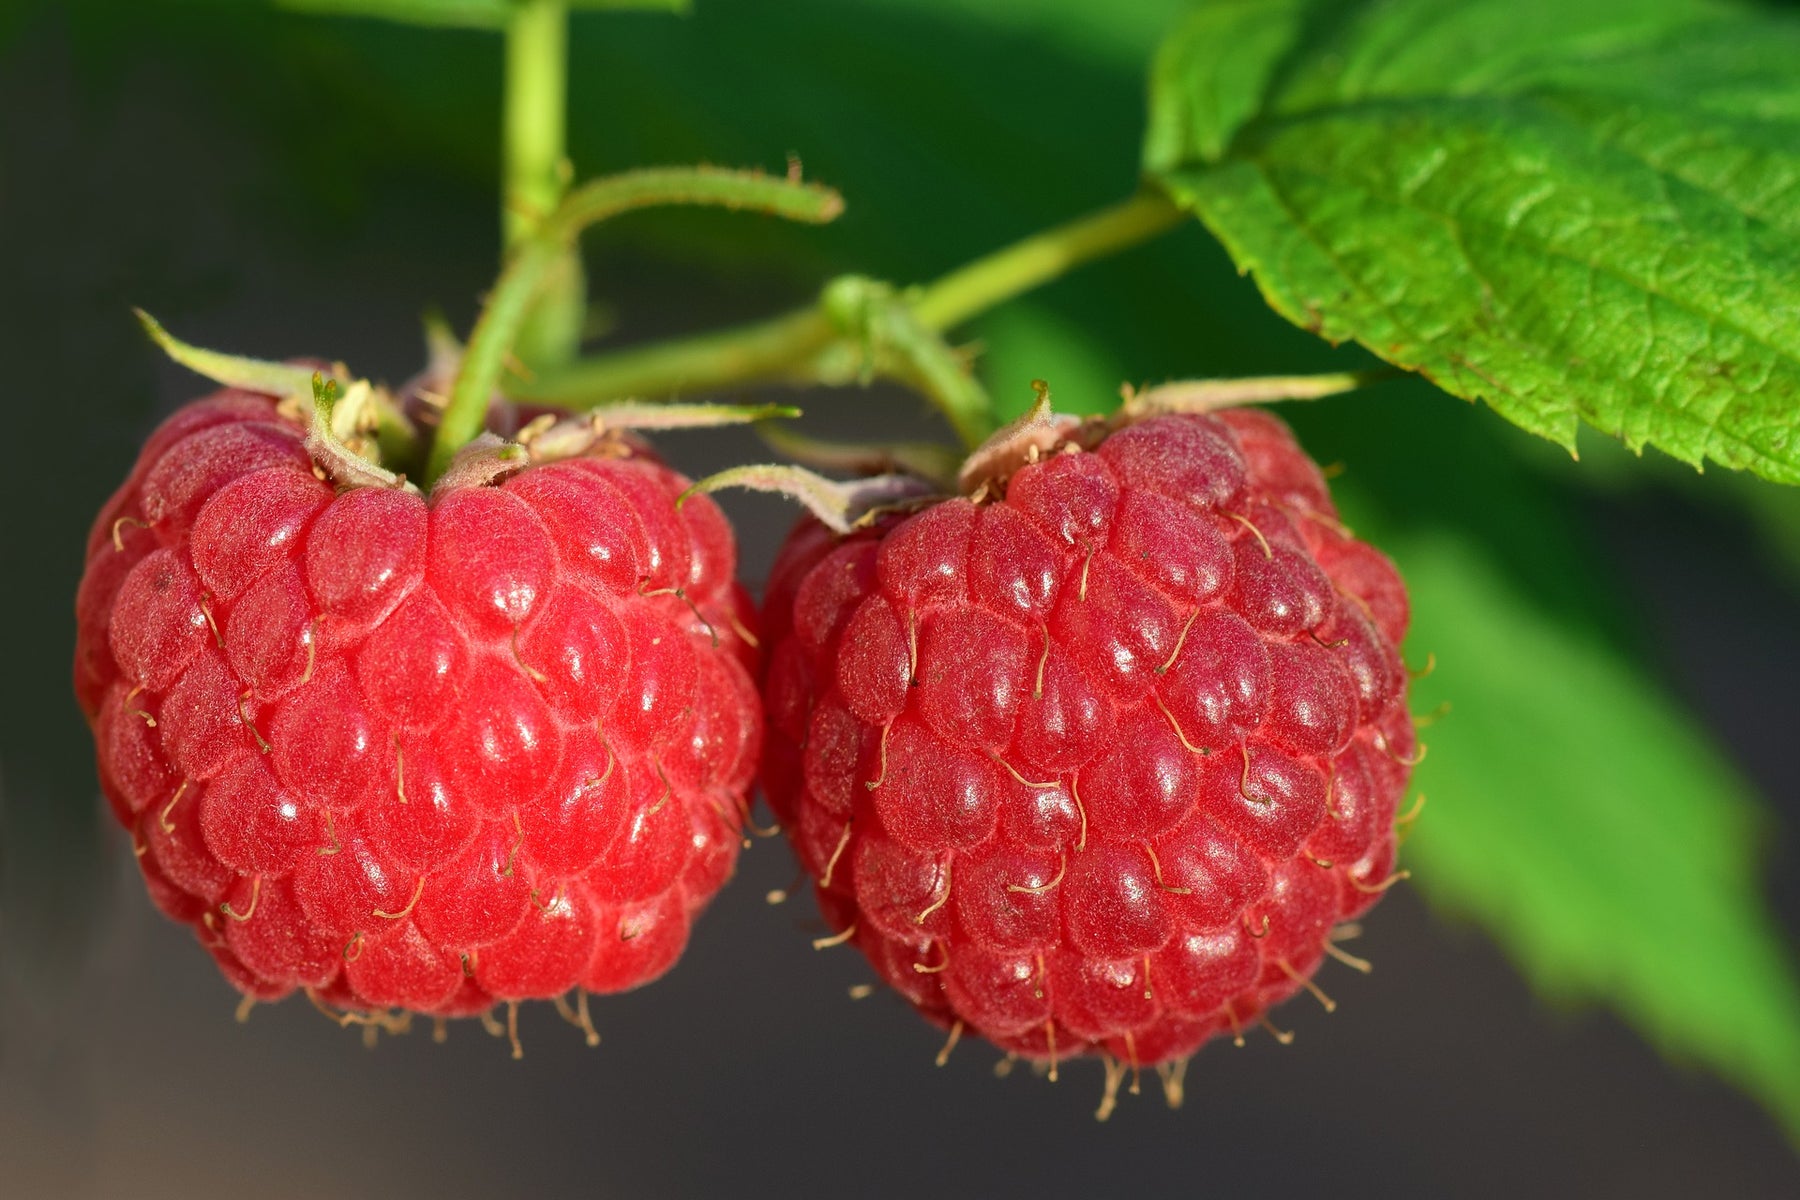 Two fresh raspberries hanging from the raspberry plant